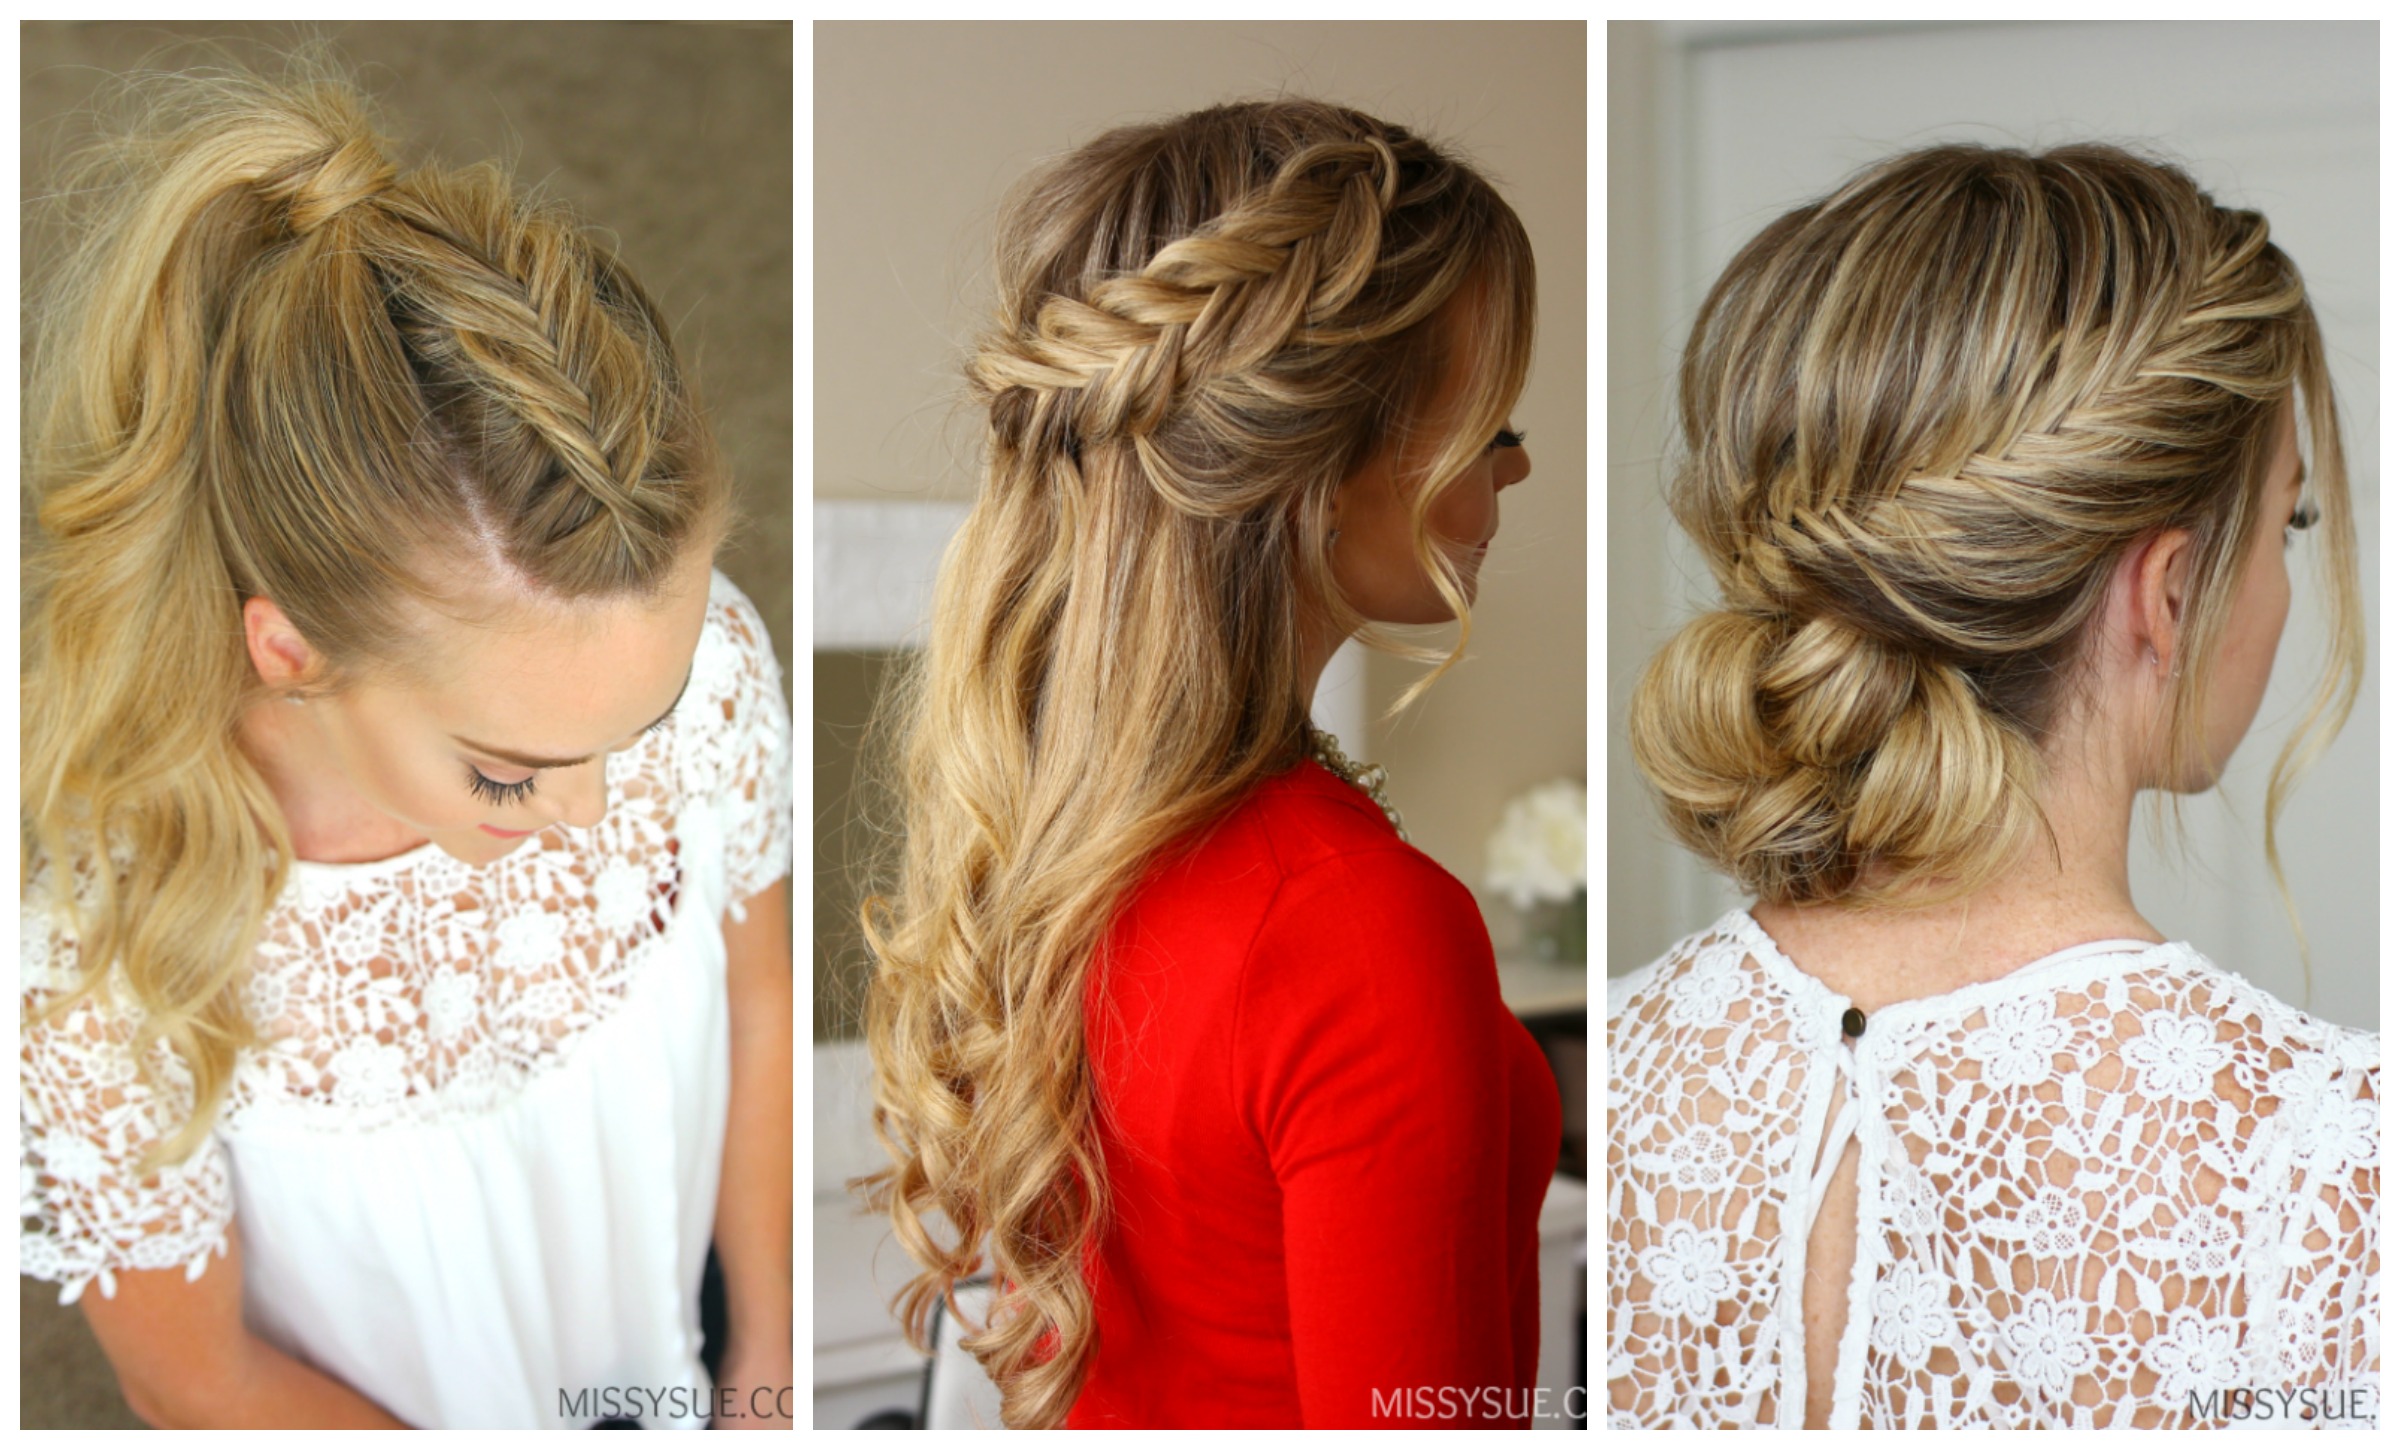 12 Perfect Holiday Braided Hairstyles from Missy Sue - fashionsy.com